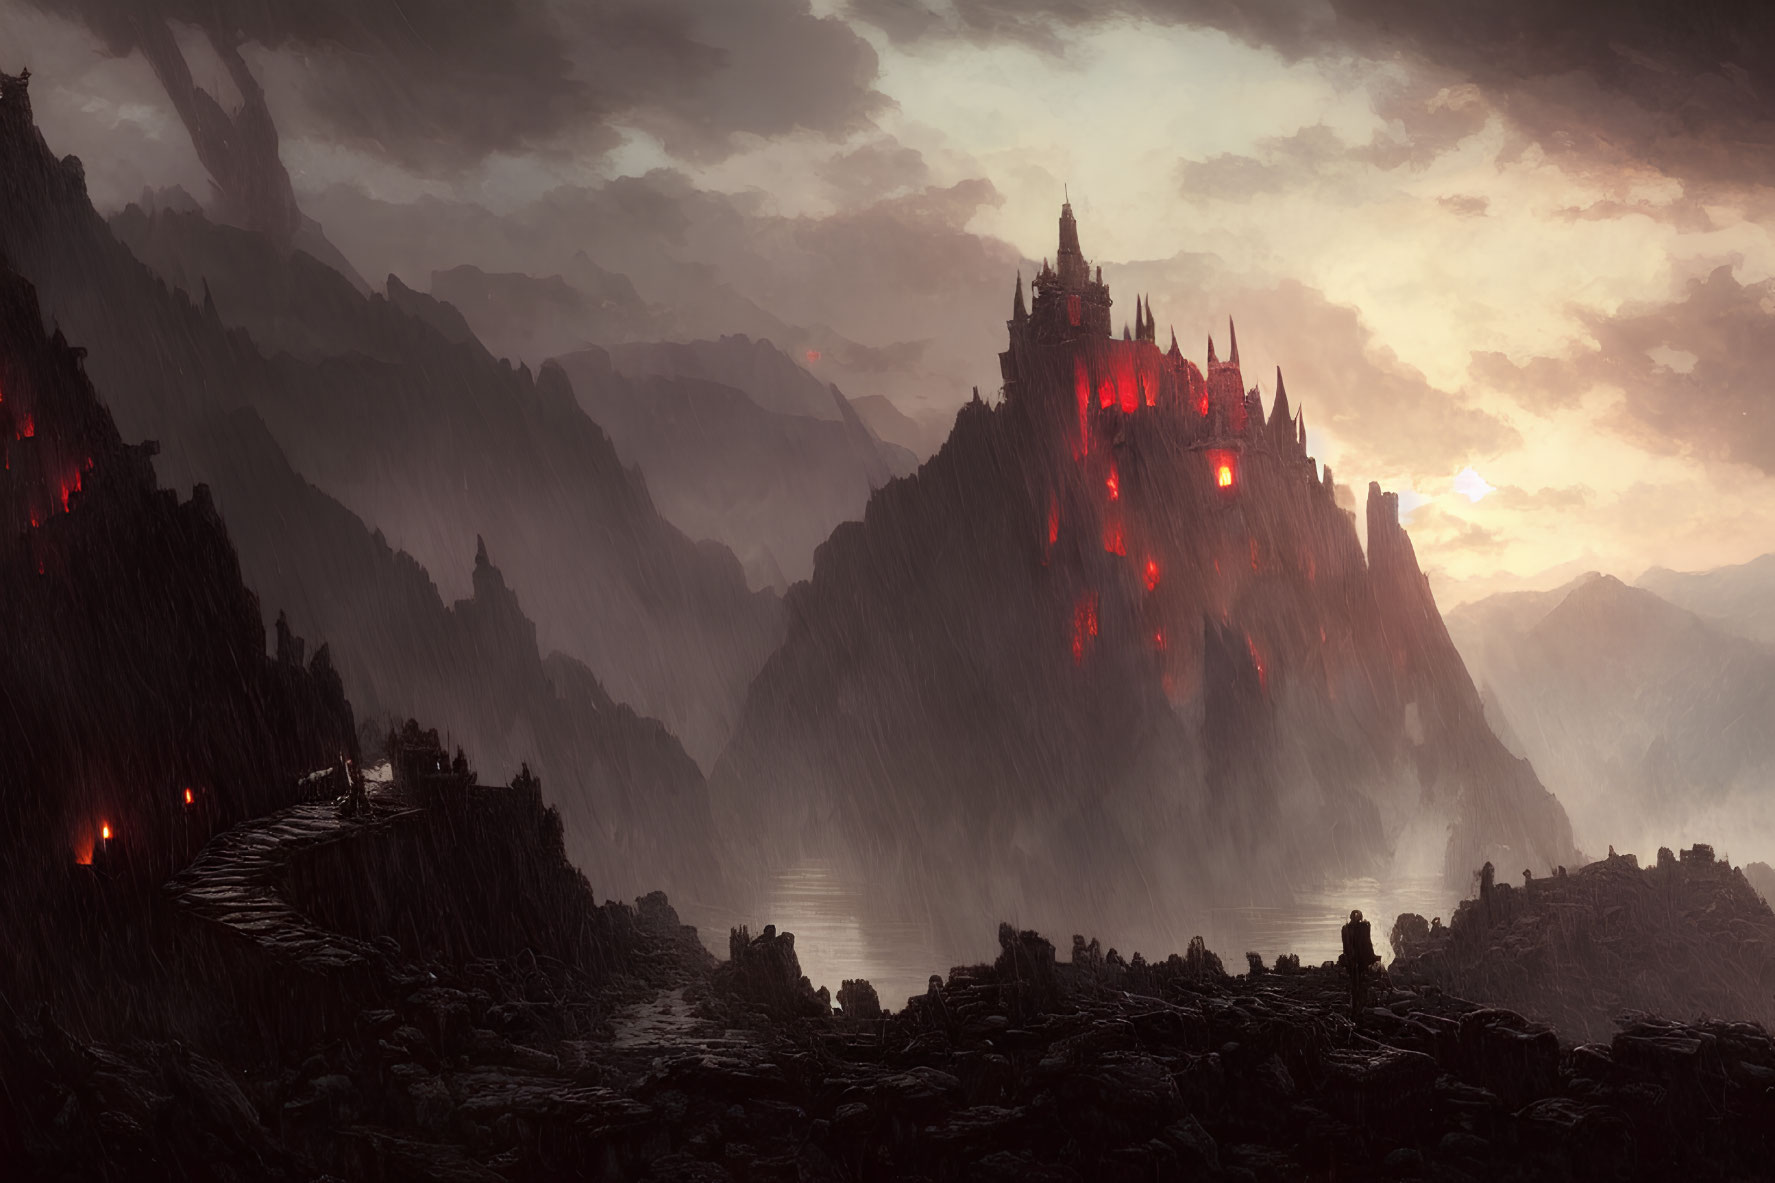 Glowing fiery castle on jagged mountains at dusk